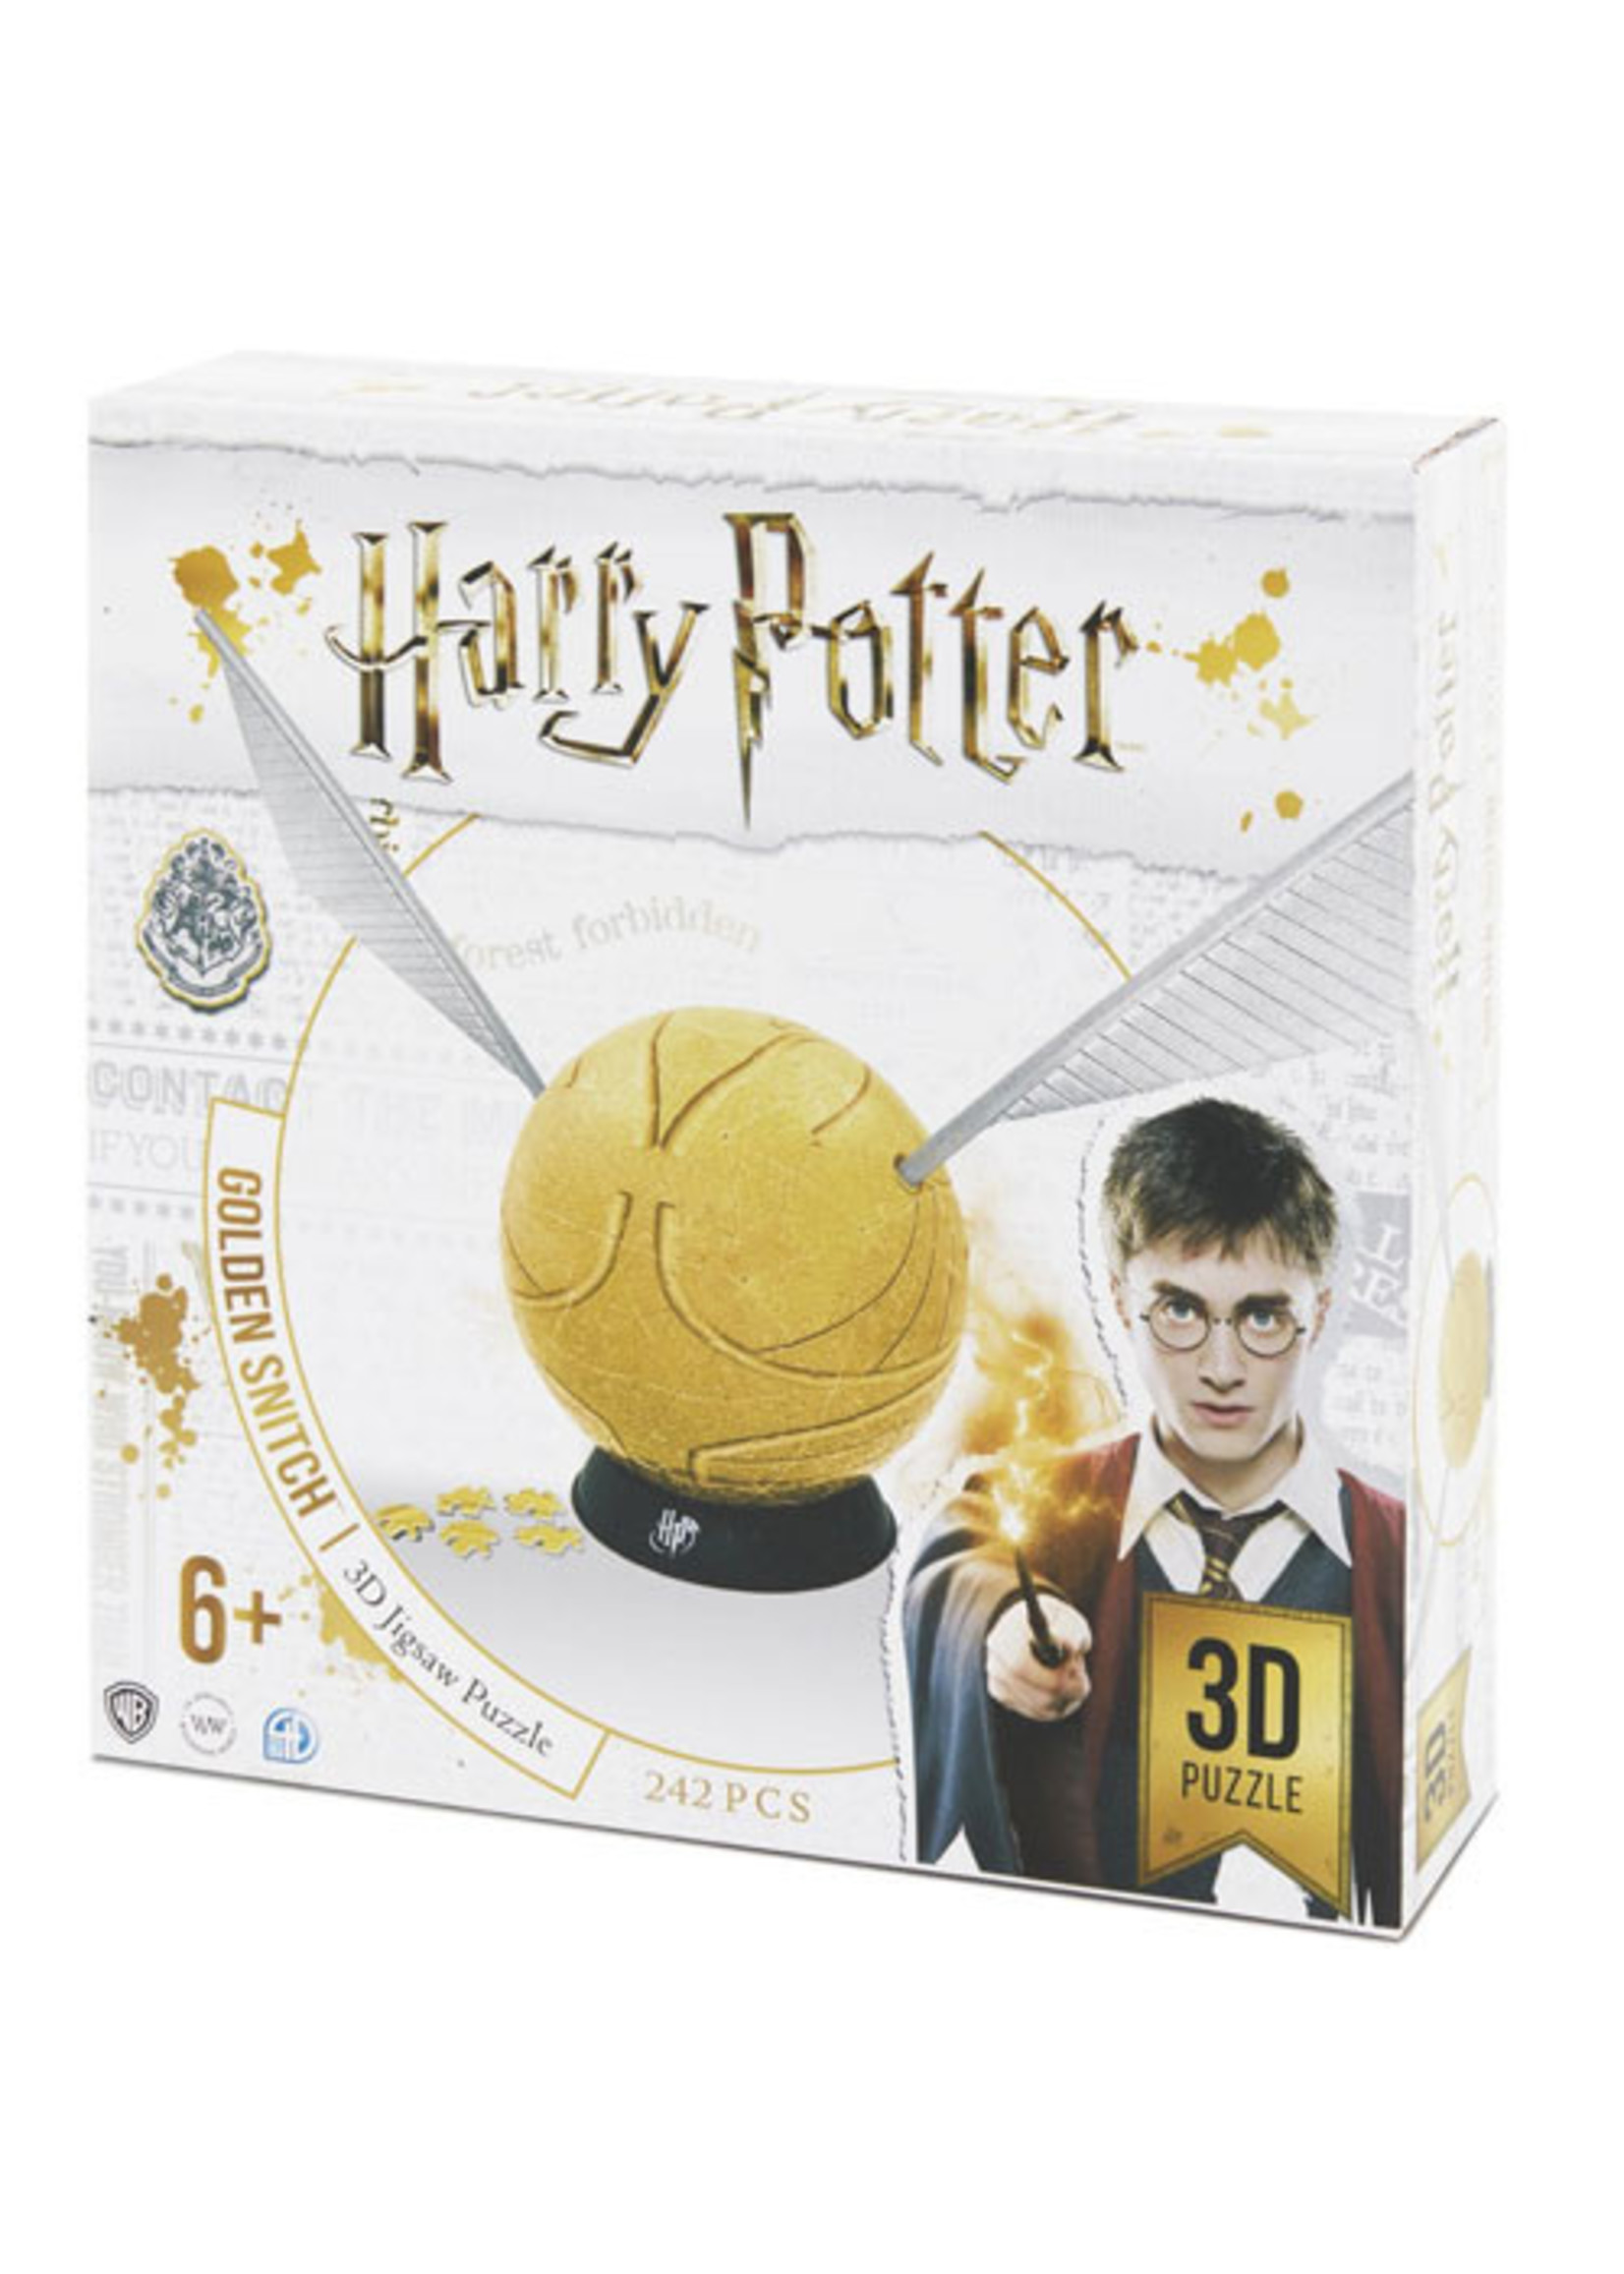 4D Puzzle Harry Potter 6in Snitch